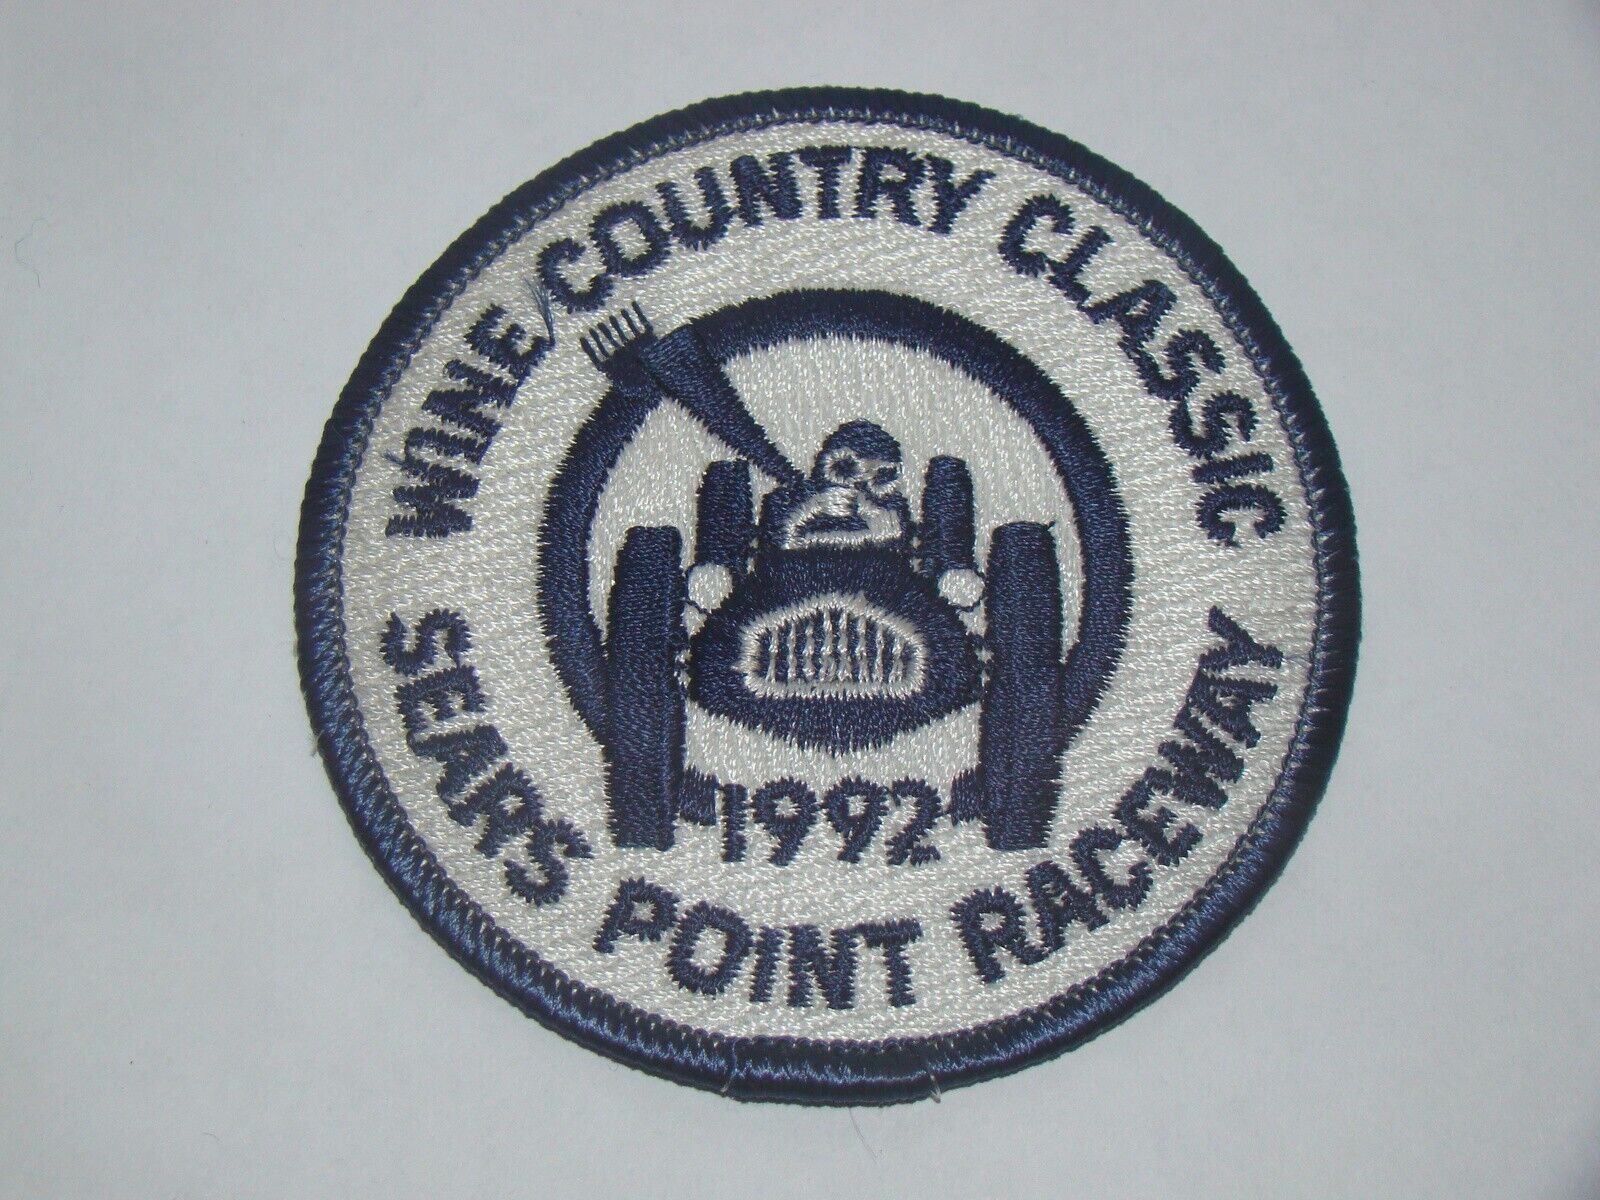 WINE COUNTRY CLASSIC - 1992  - SEARS POINT RACEWAY Patch